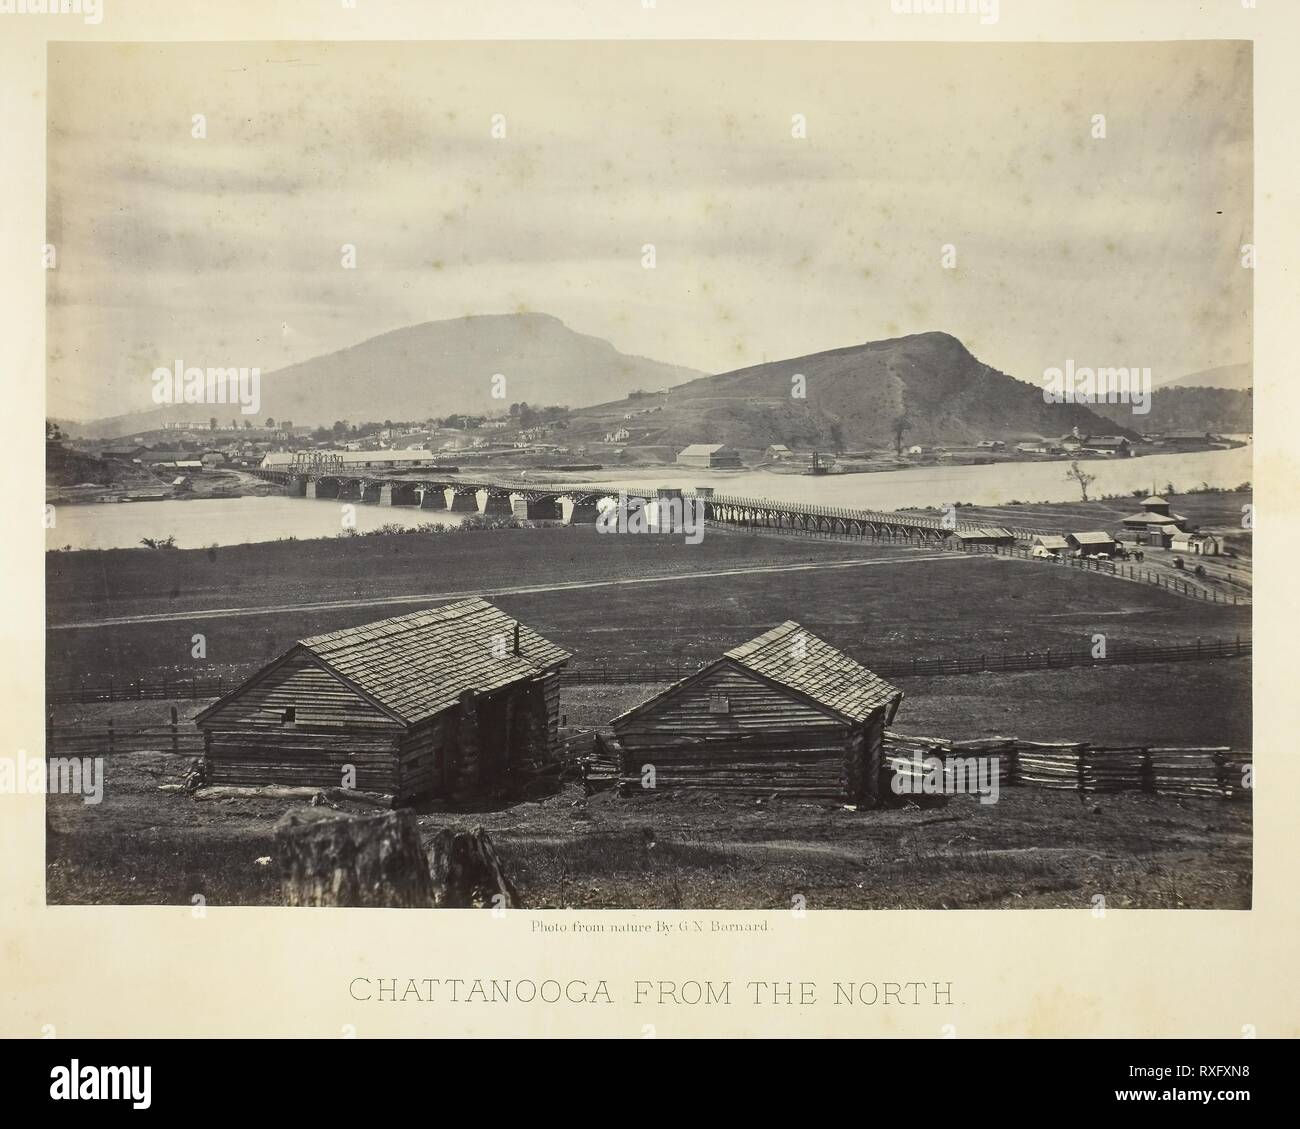 Chattanooga from the North. George N. Barnard; American, 1819-1902. Date: 1864. Dimensions: 25.6 x 35.8 cm (image/paper); 41 x 50.8 cm (album page). Albumen print, plate 8 from the album 'Photographic Views of the Sherman Campaign' (1866). Origin: United States. Museum: The Chicago Art Institute. Stock Photo